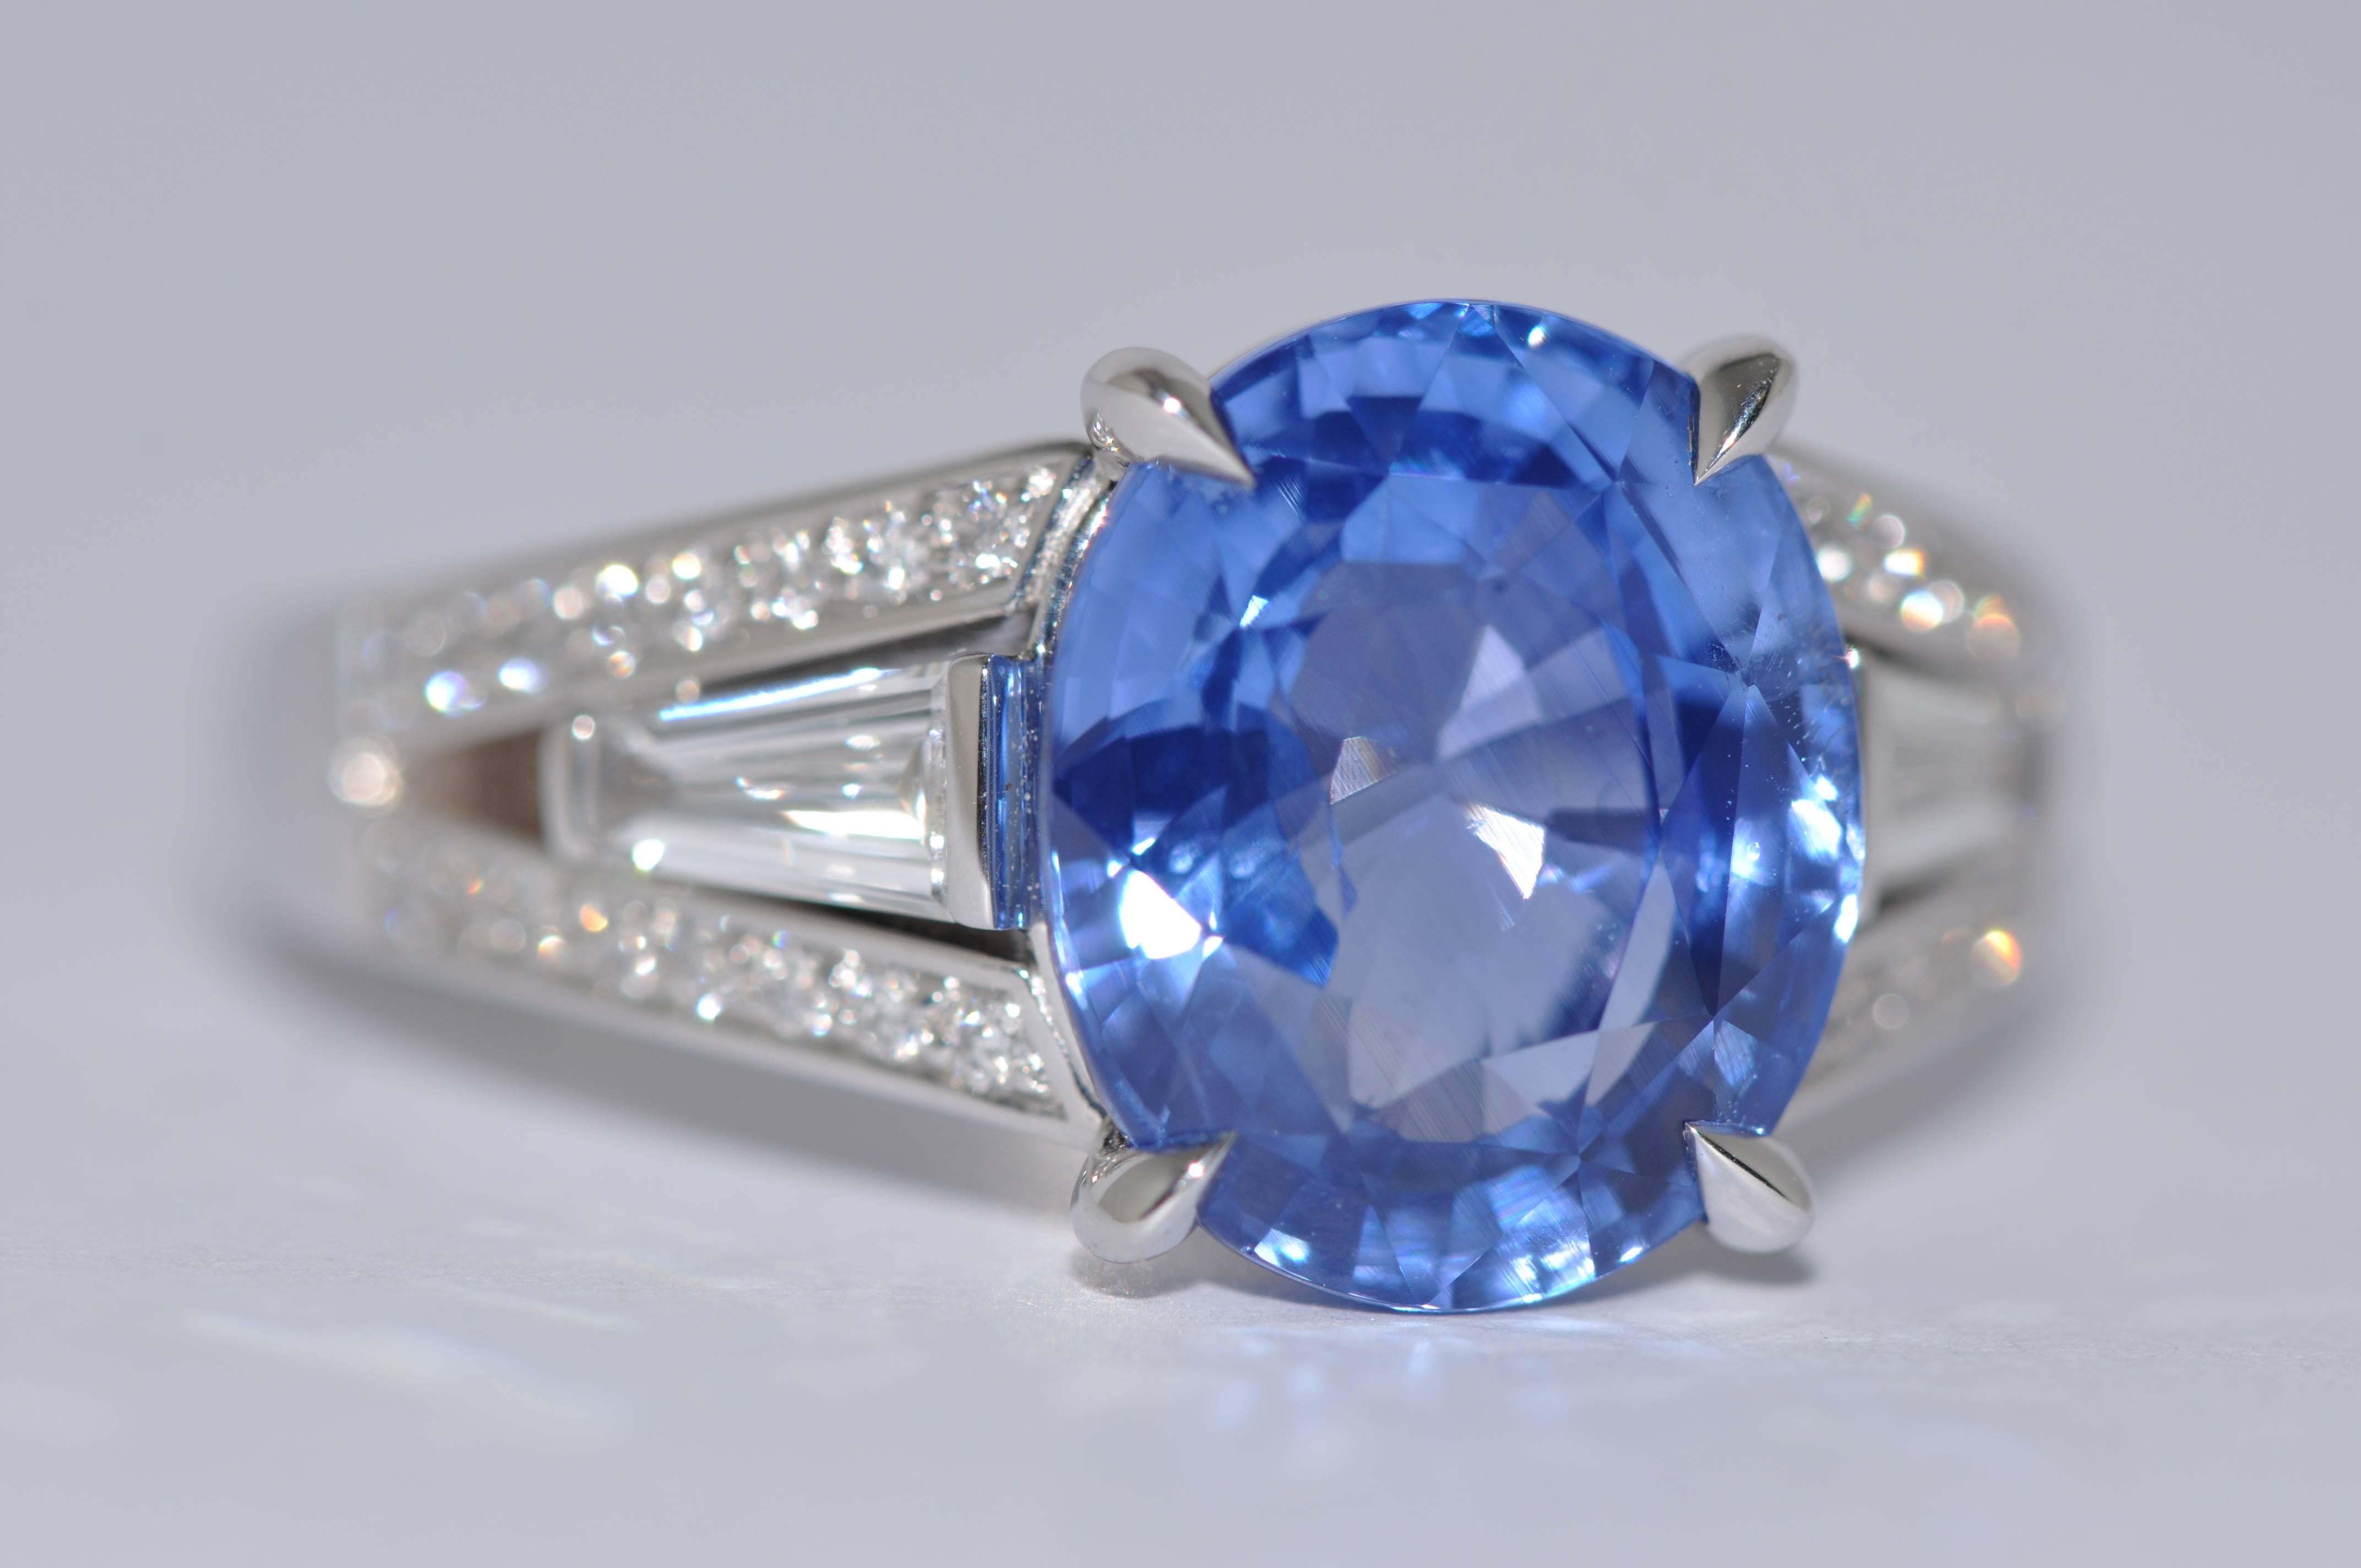 Discover this Madagascar GRS Certified Oval Blue Sapphire 5.91 Carat and Diamonds Palladium Ring.
Madagascar Sapphire 5.91 Carat 
Certification : GRS
Dimensions : 11.05 x 9.25 x 6.17 (mm)
Cut : Modified brilliant/step (5)
Shape : Oval
Color : Blue
2